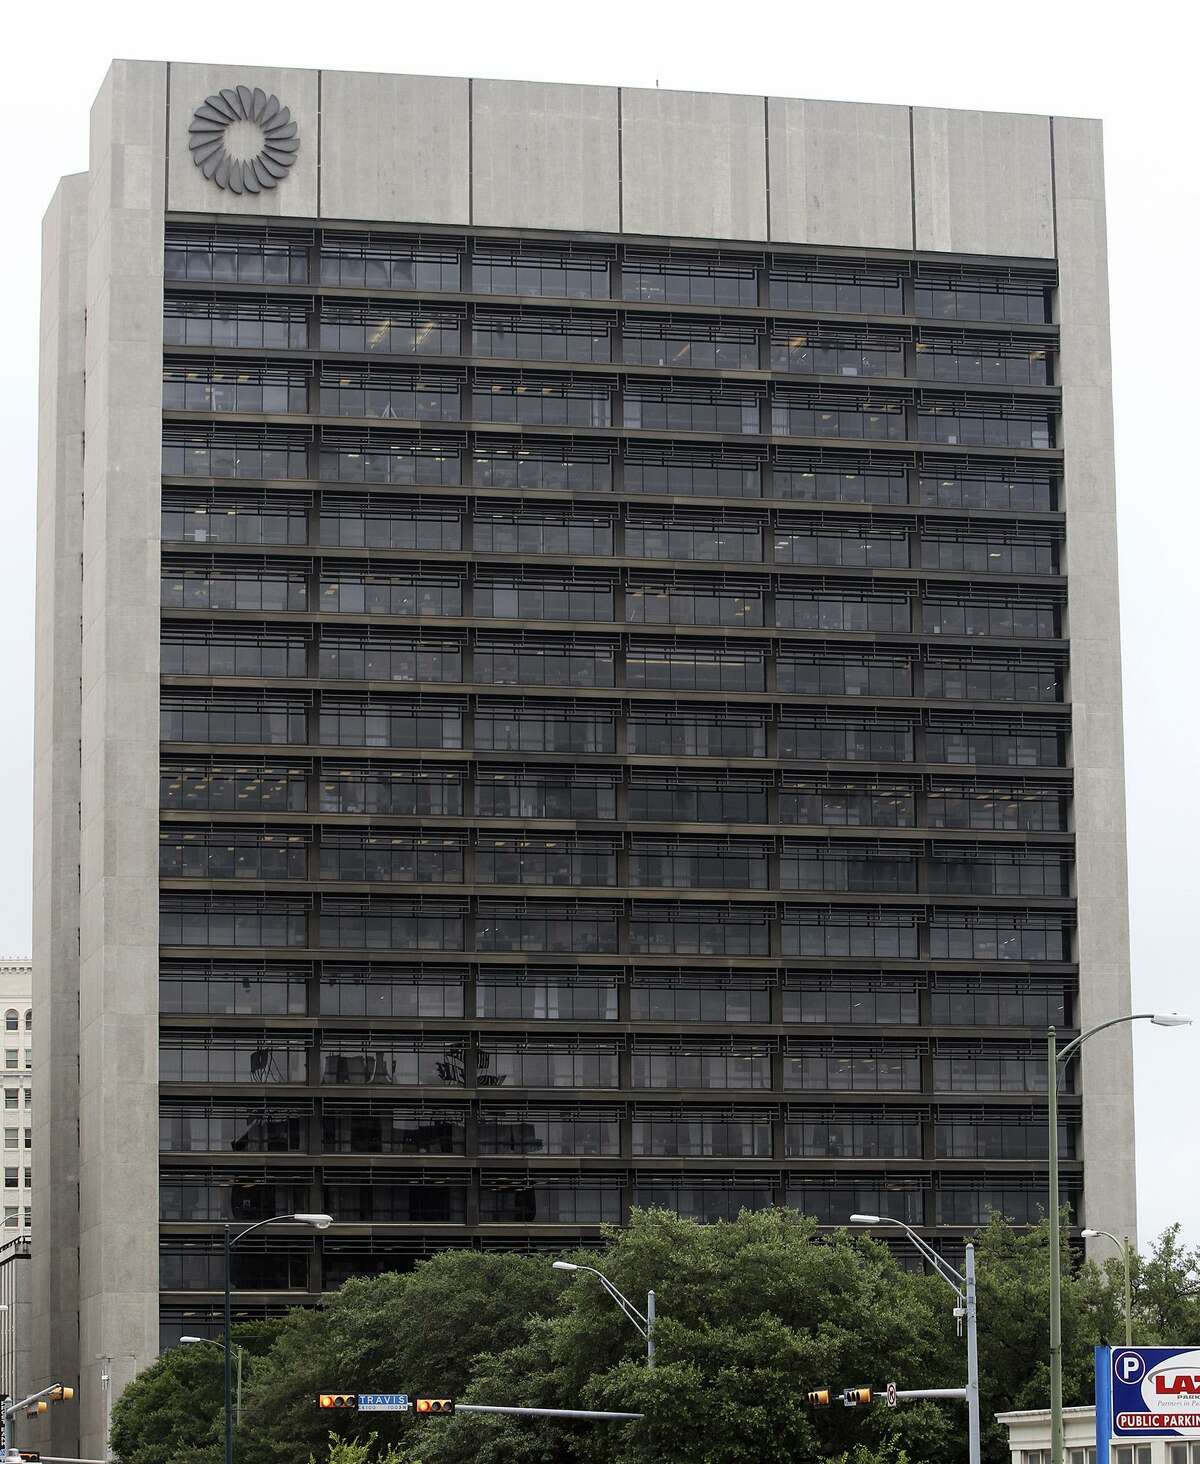 The Frost Bank Tower in San Antonio, Texas on June 26, 2014.